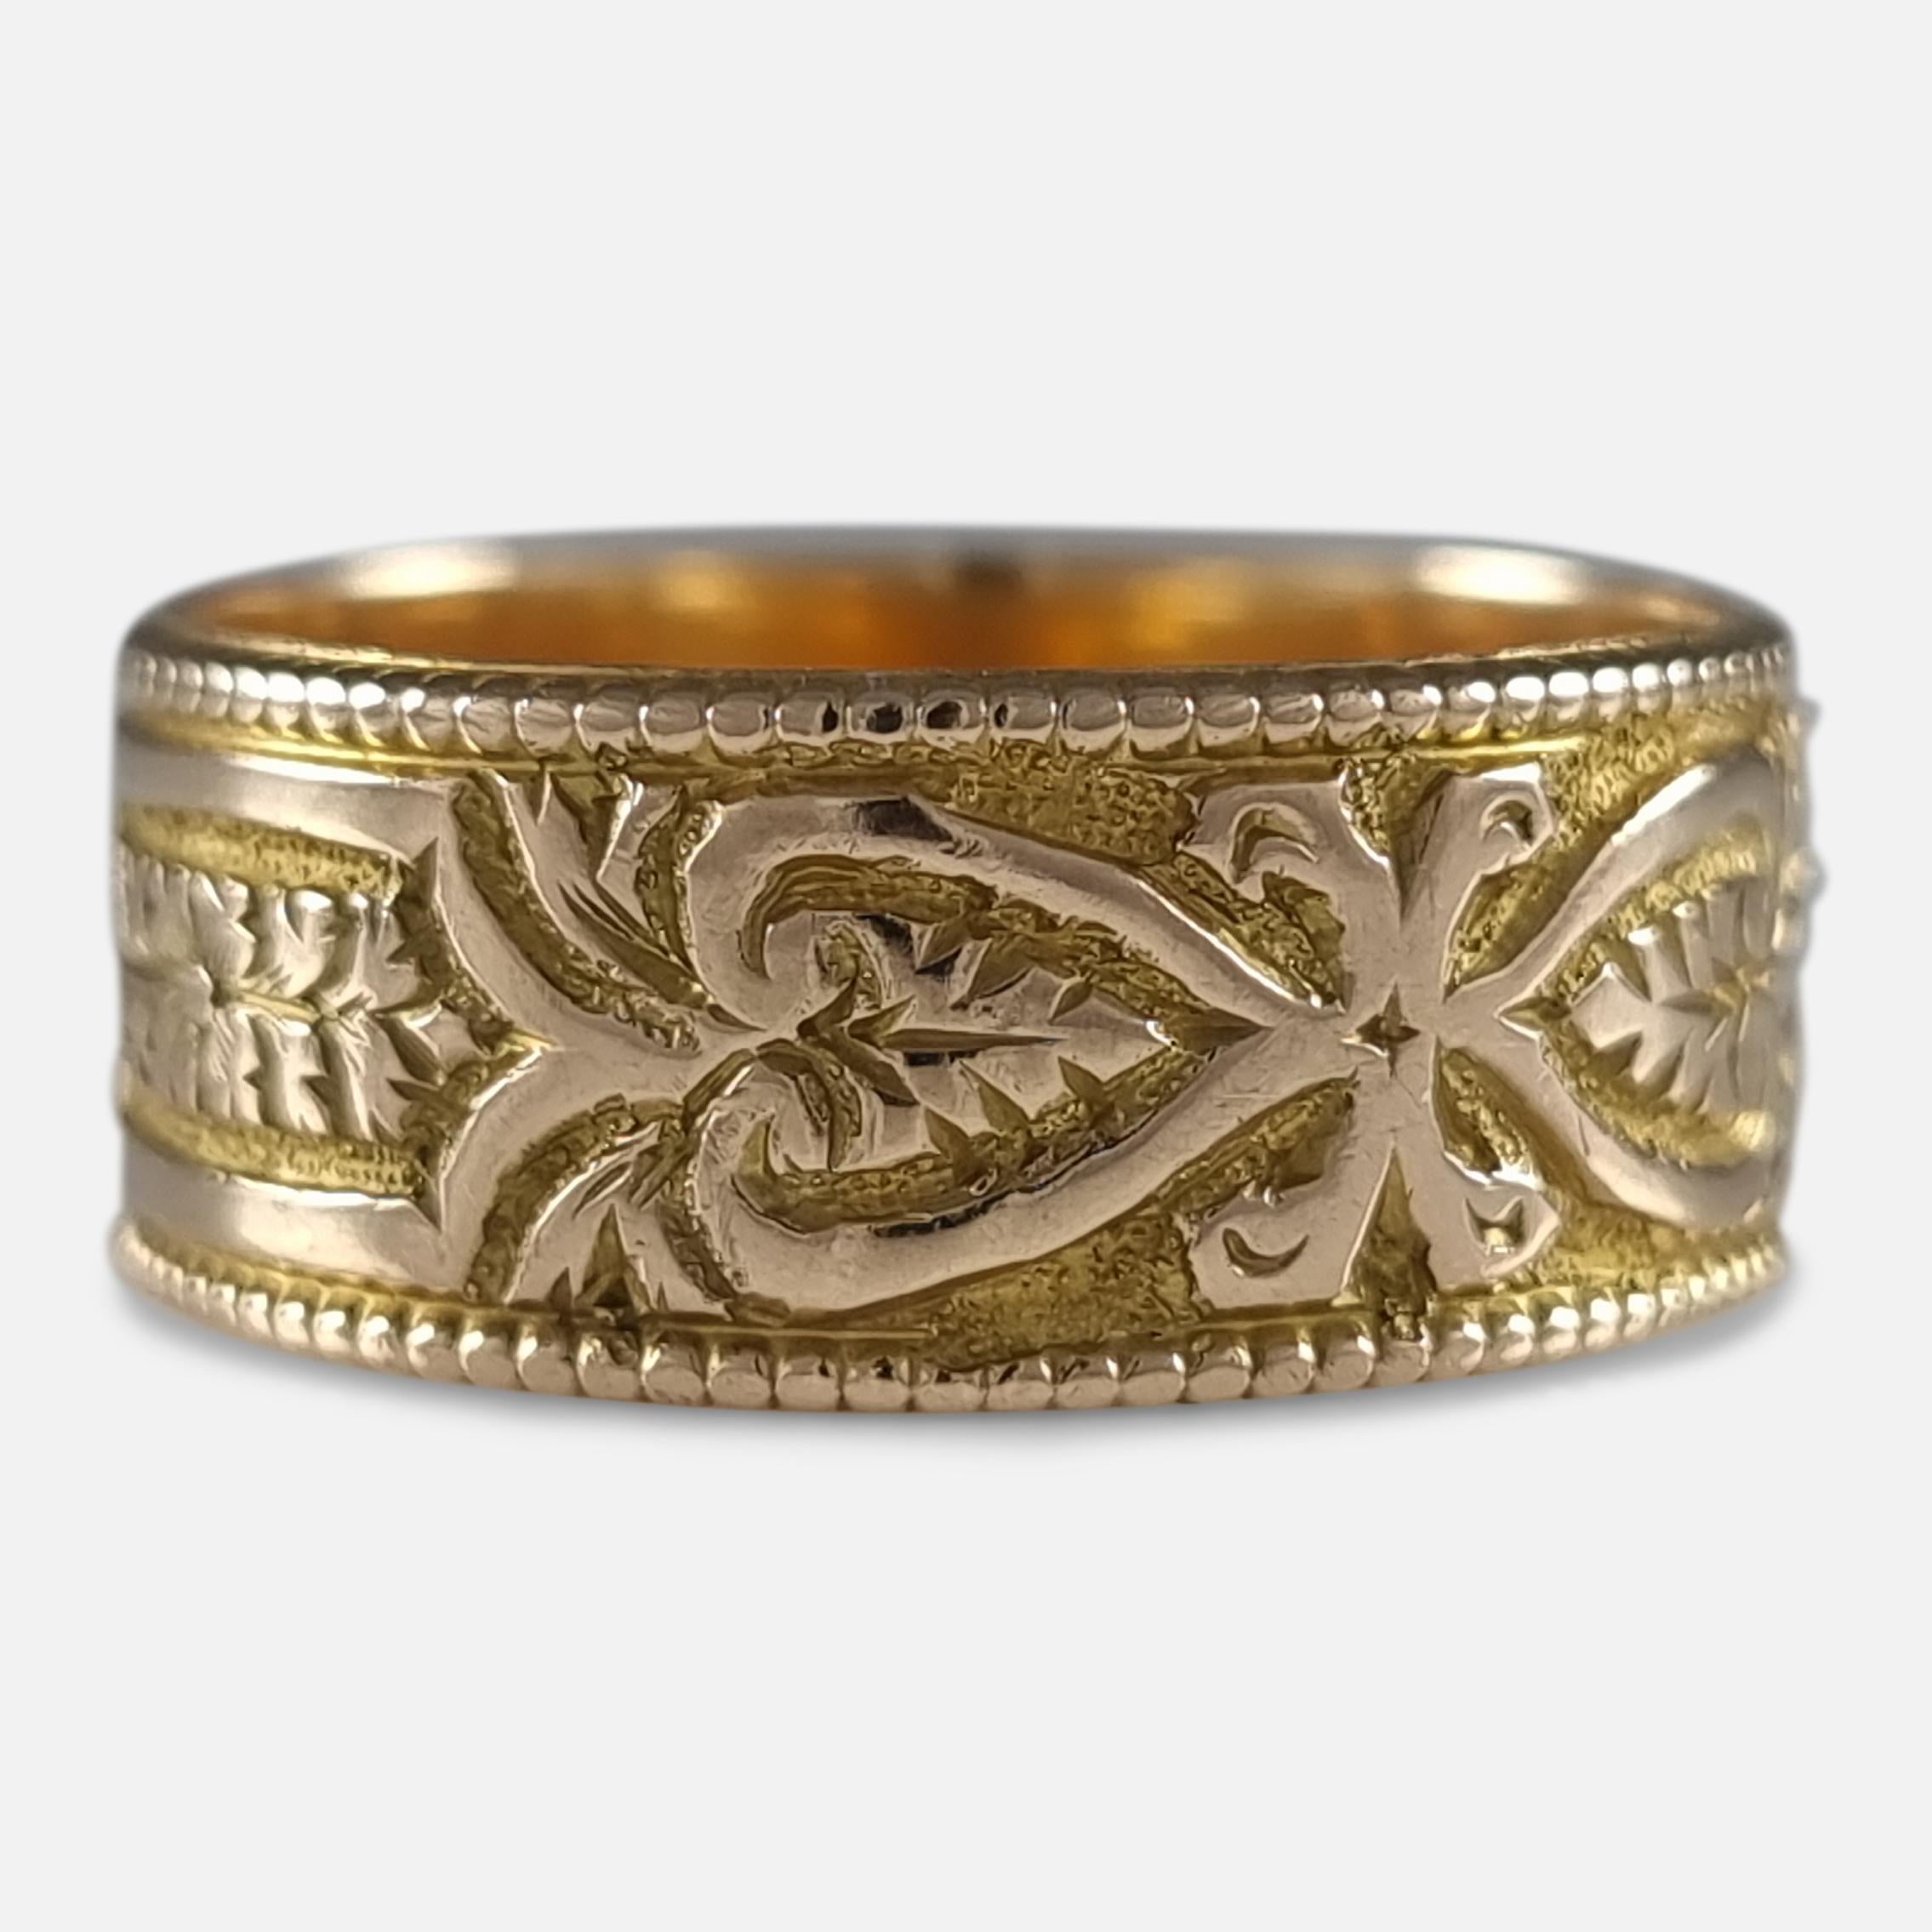 Late Victorian Victorian 18 Carat Gold Engraved Keeper Ring, 1883